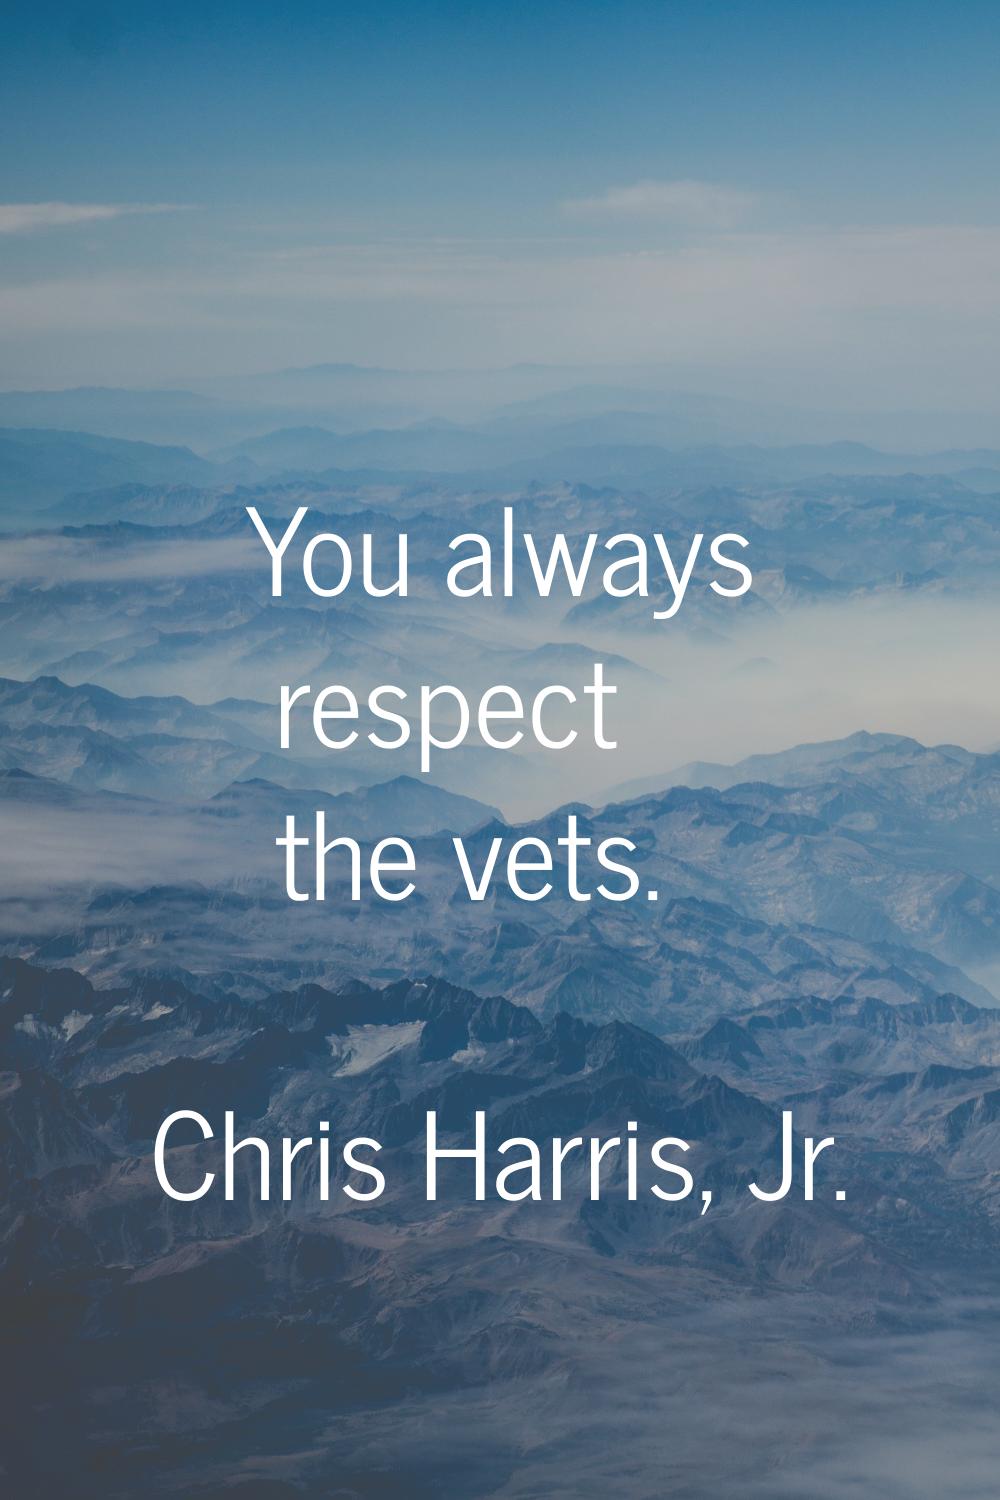 You always respect the vets.